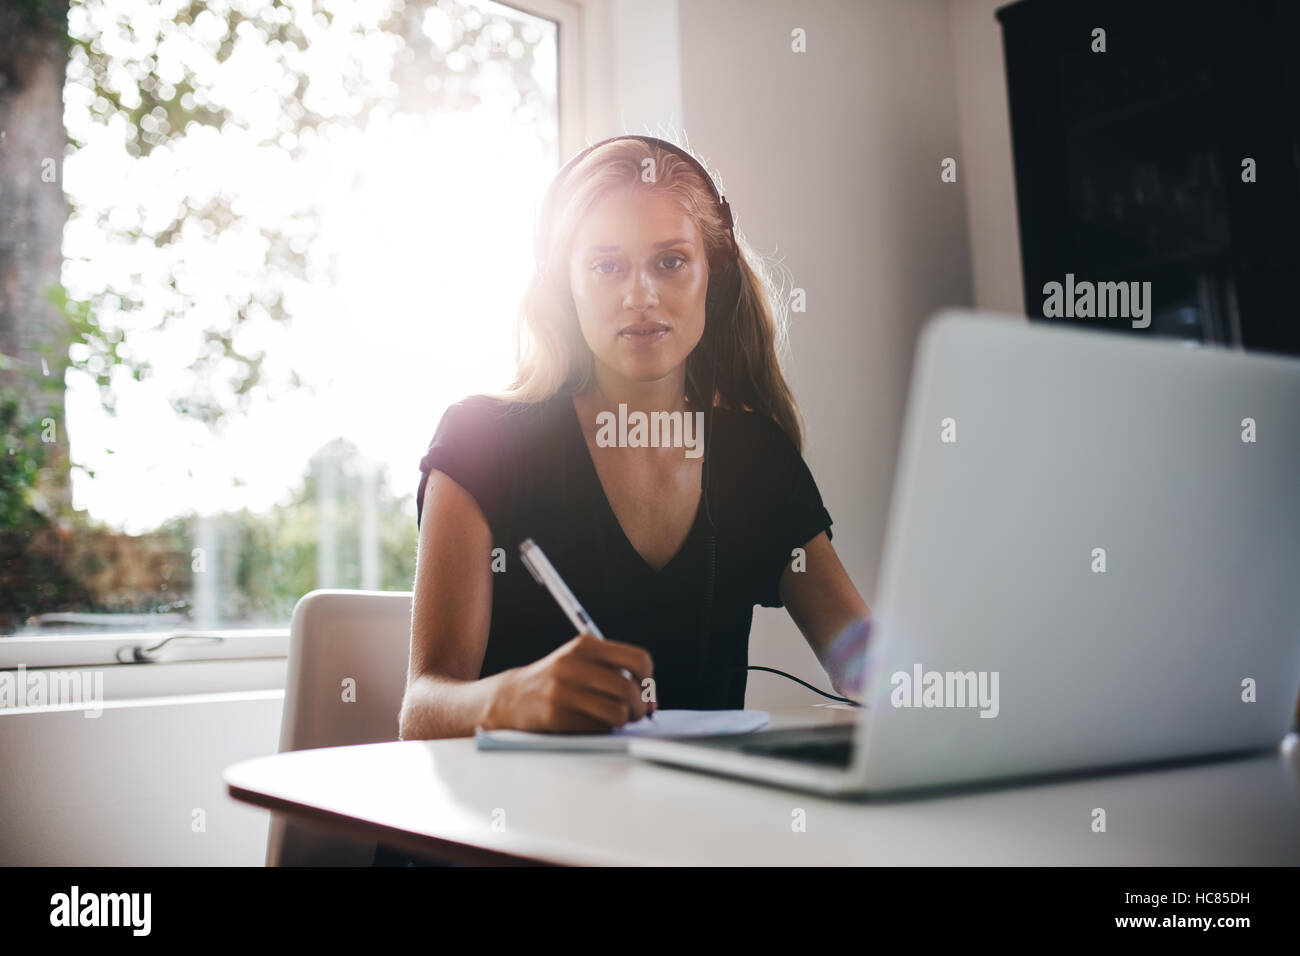 Portrait of young woman sitting in kitchen with headphones writing note. Female studying at home with laptop. Stock Photo